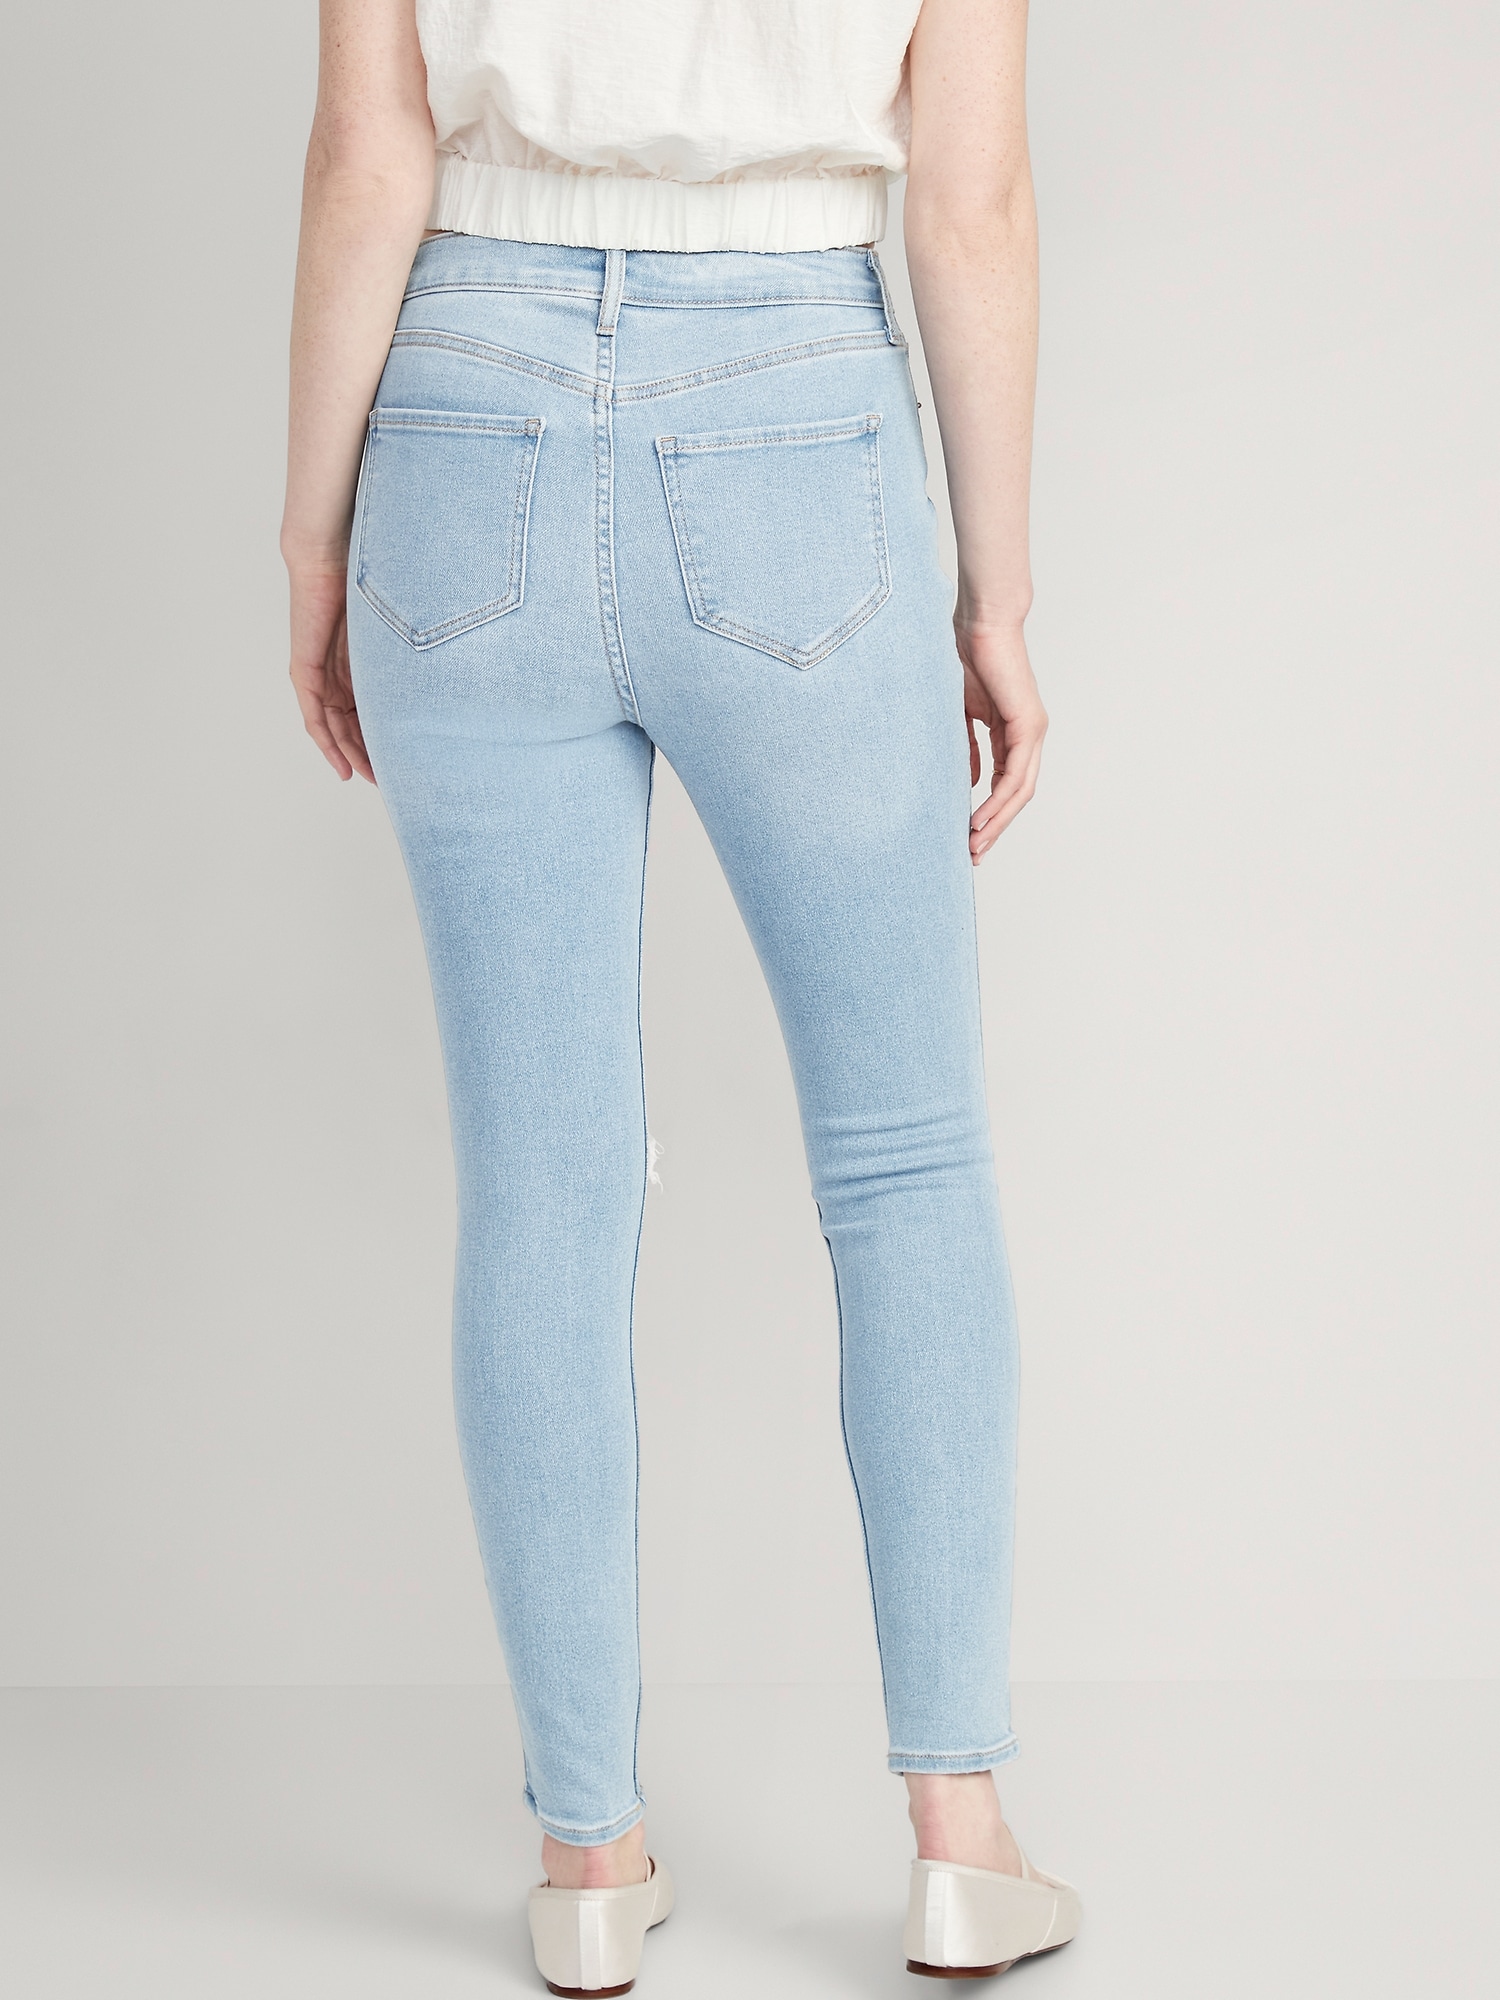 Stretch Extra | High-Waisted for Navy Women Old Super-Skinny Rockstar Jeans 360°